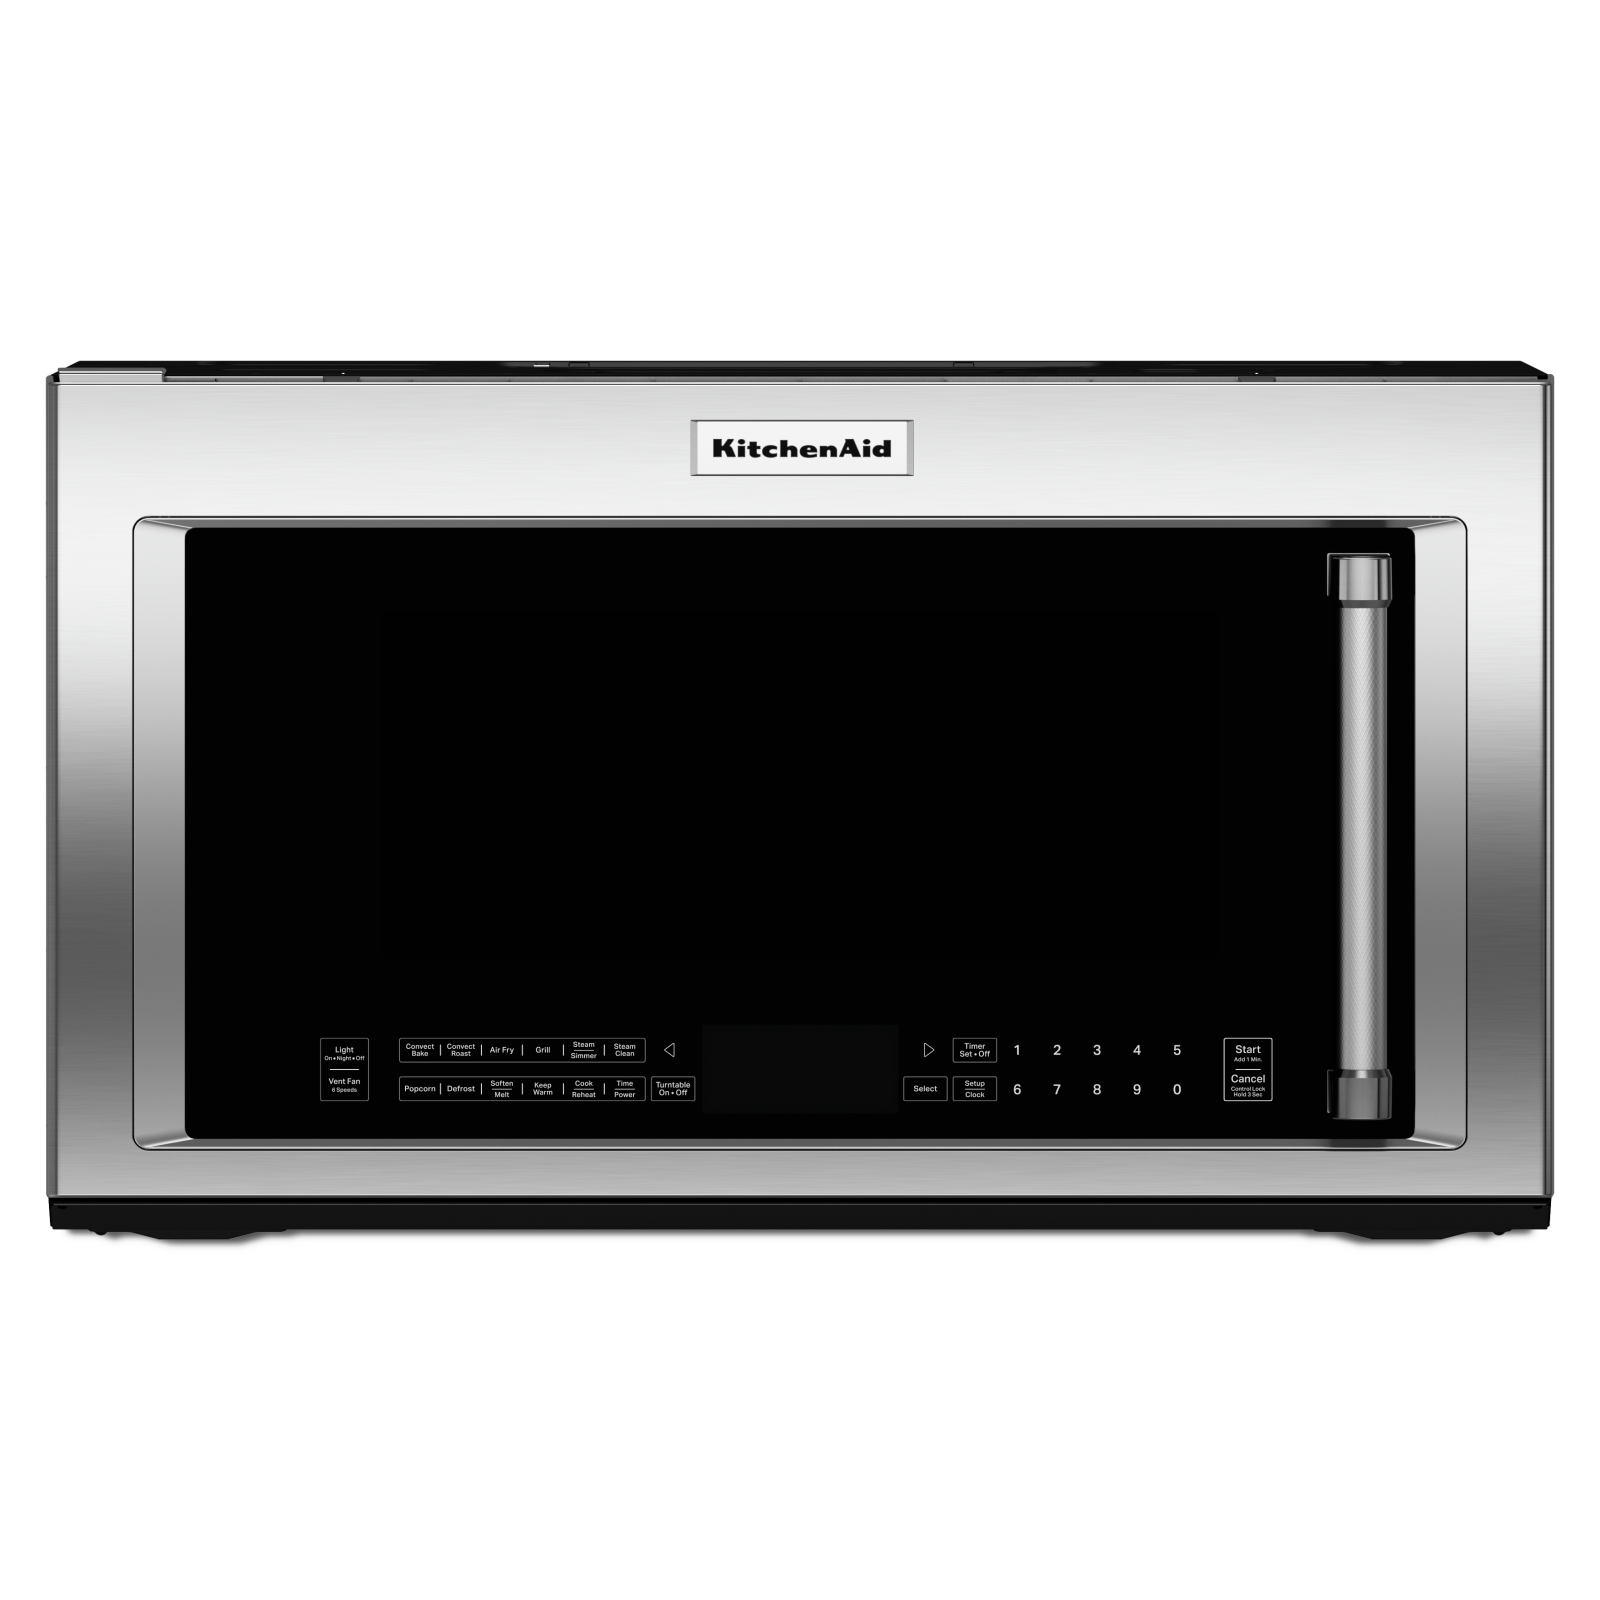 KitchenAid - 1.9 cu. Ft  Over the range Microwave in Stainless - YKMHC319LPS